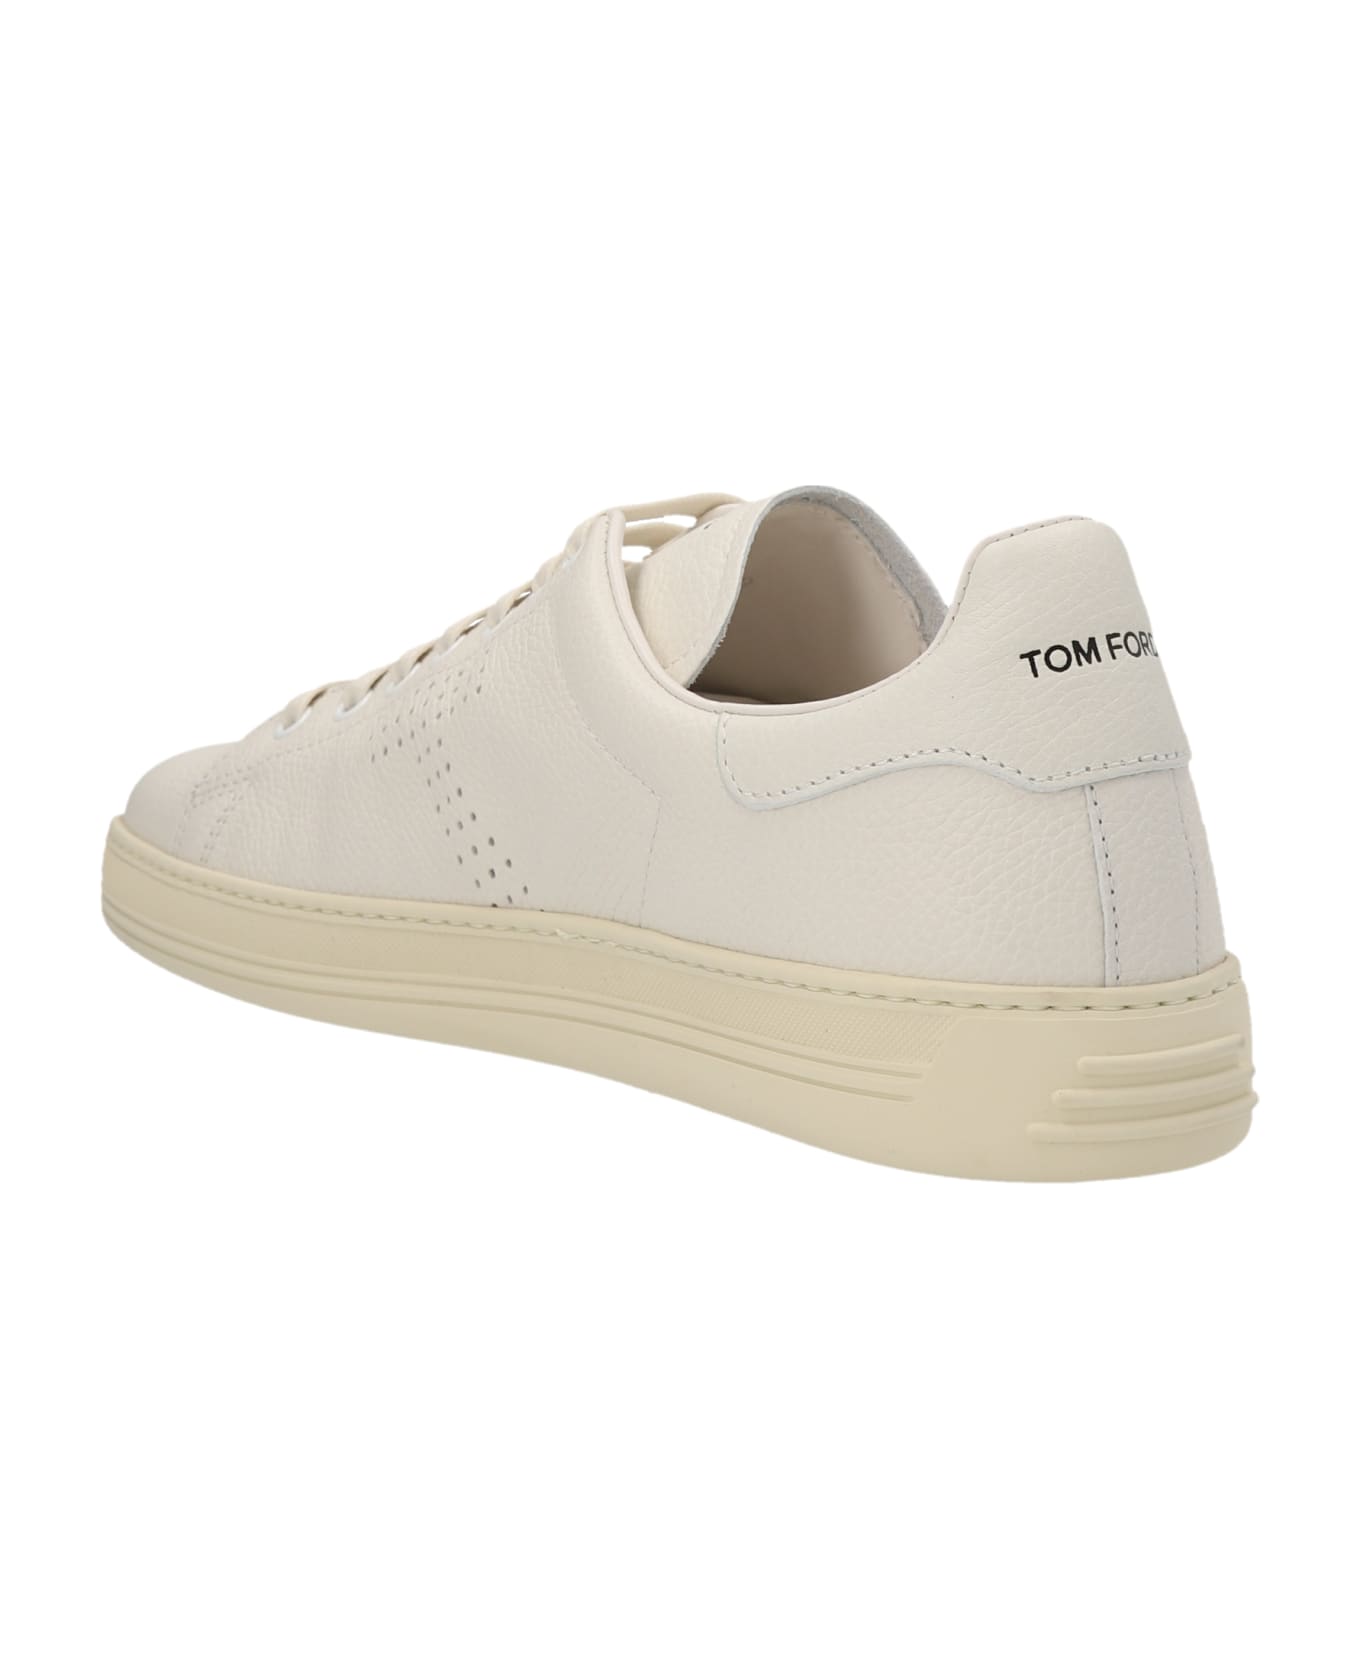 Tom Ford Logo Leather Sneakers - White